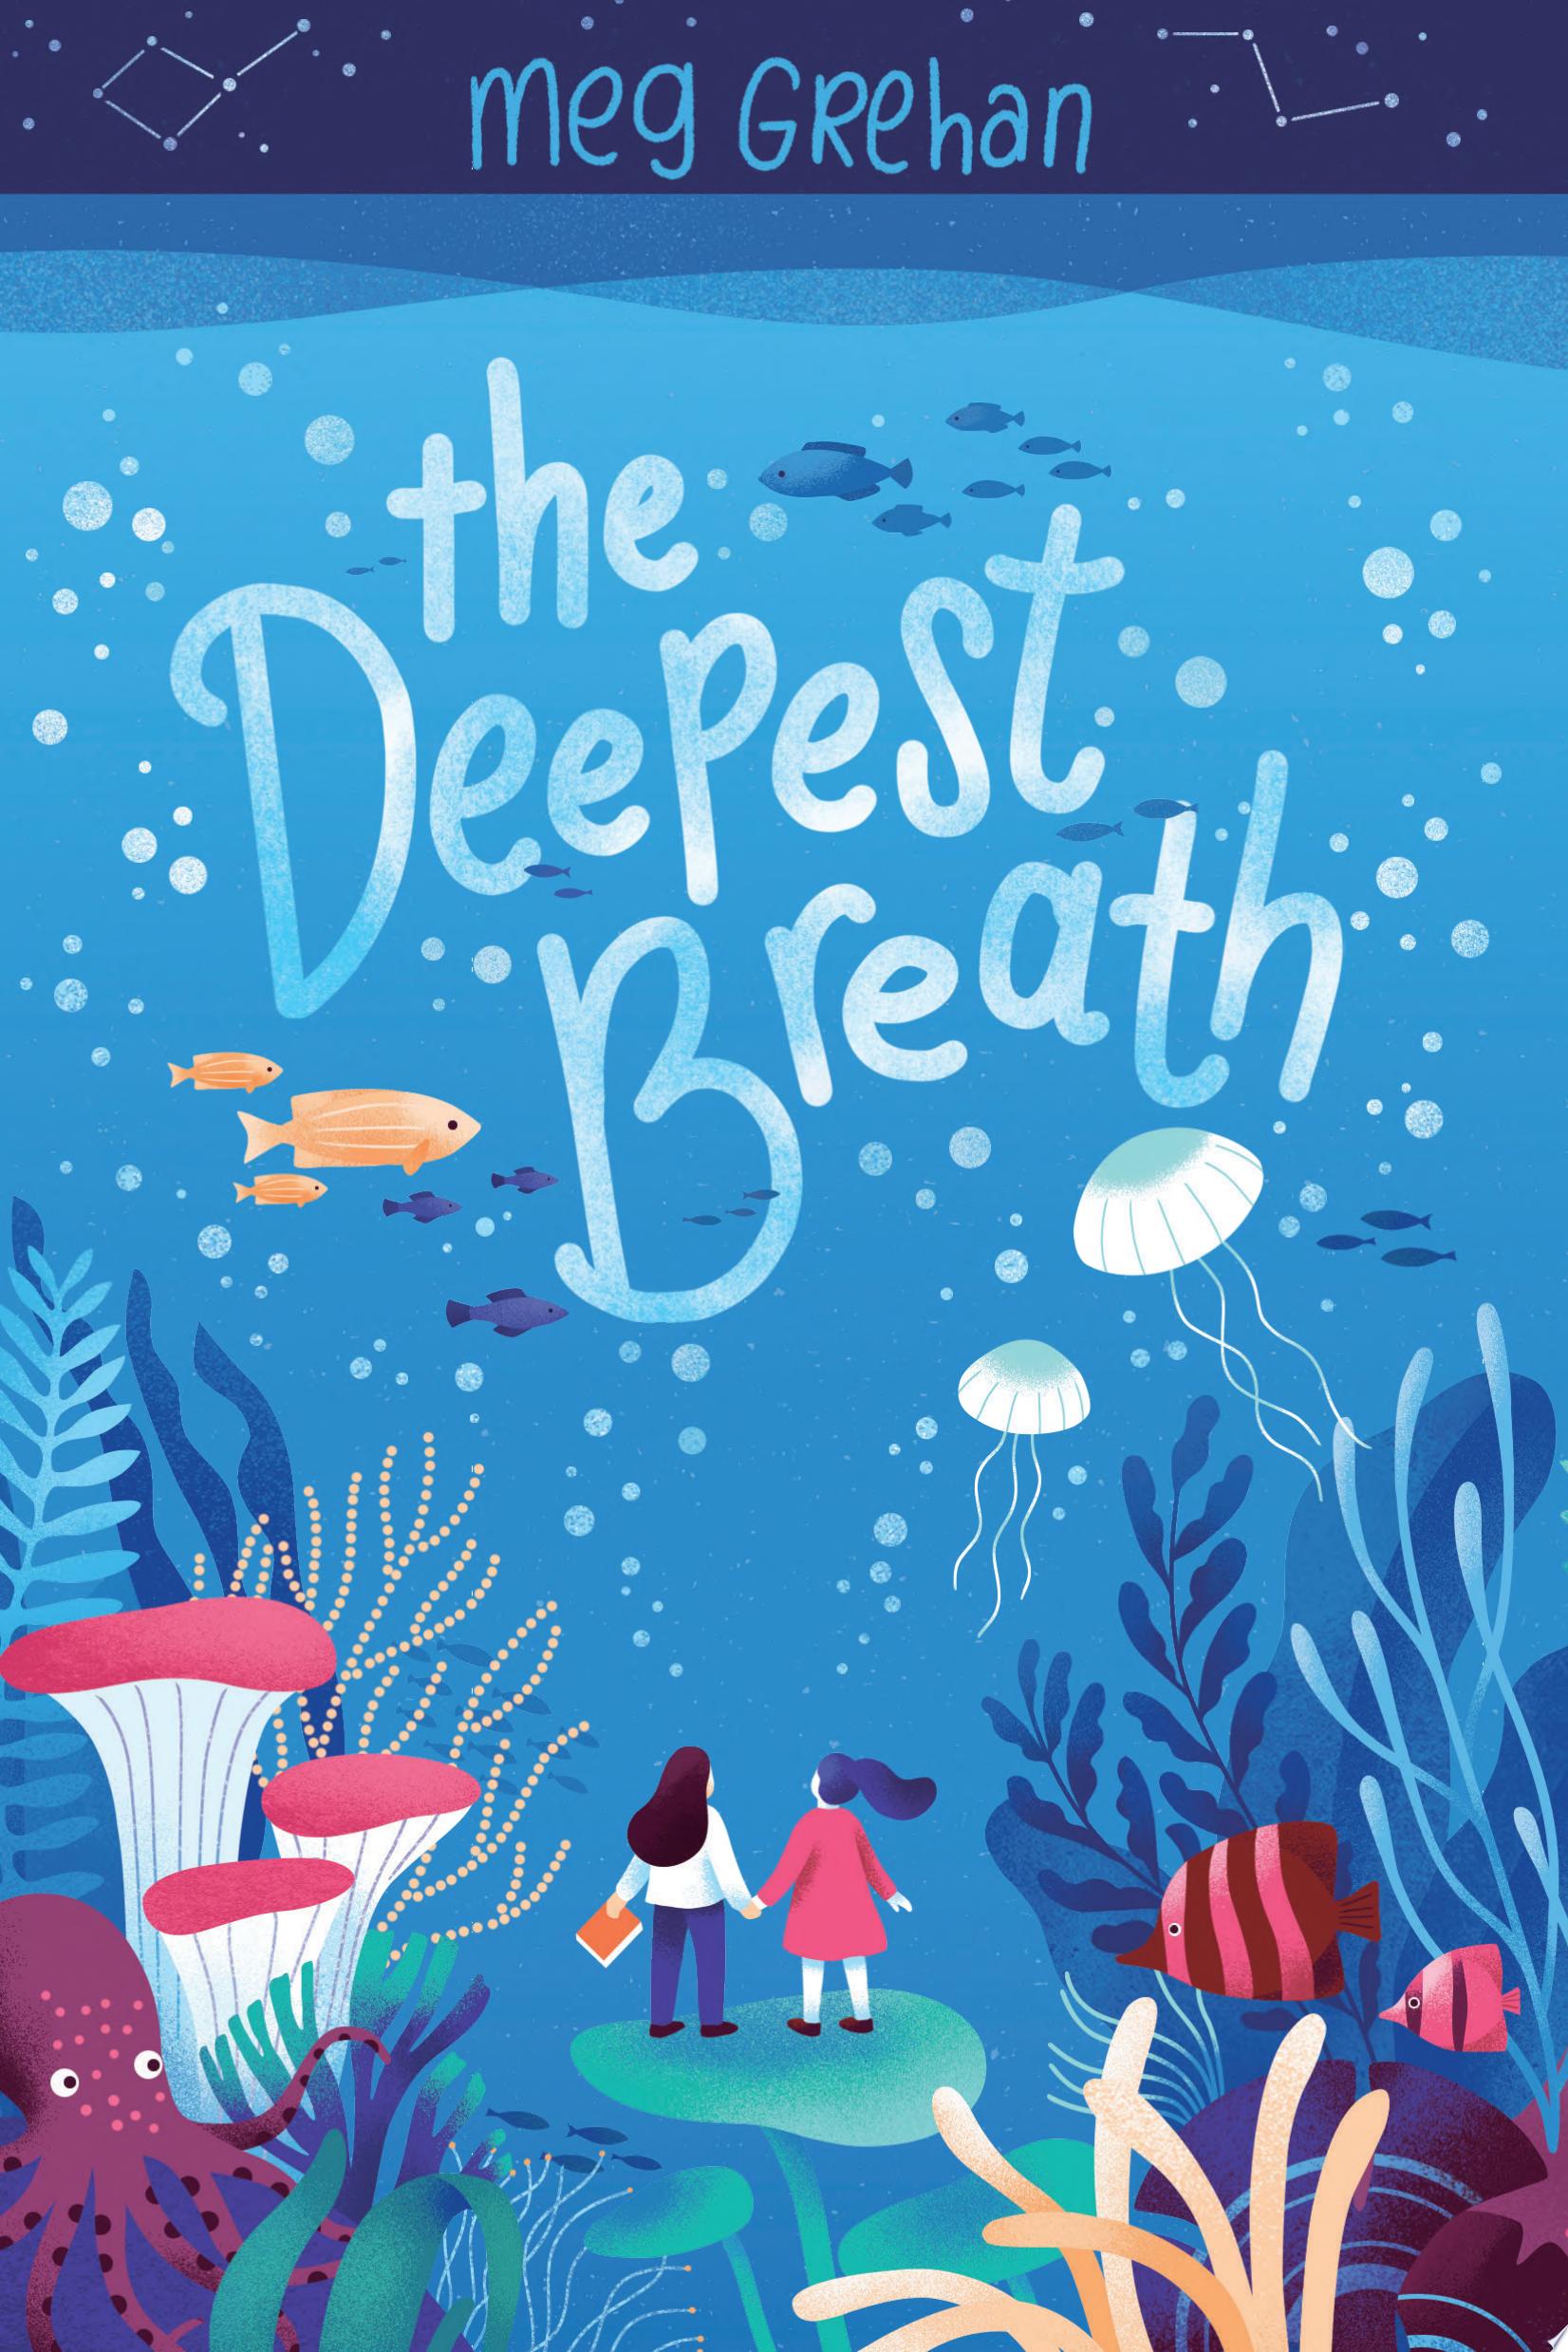 Image for "Deepest Breath"